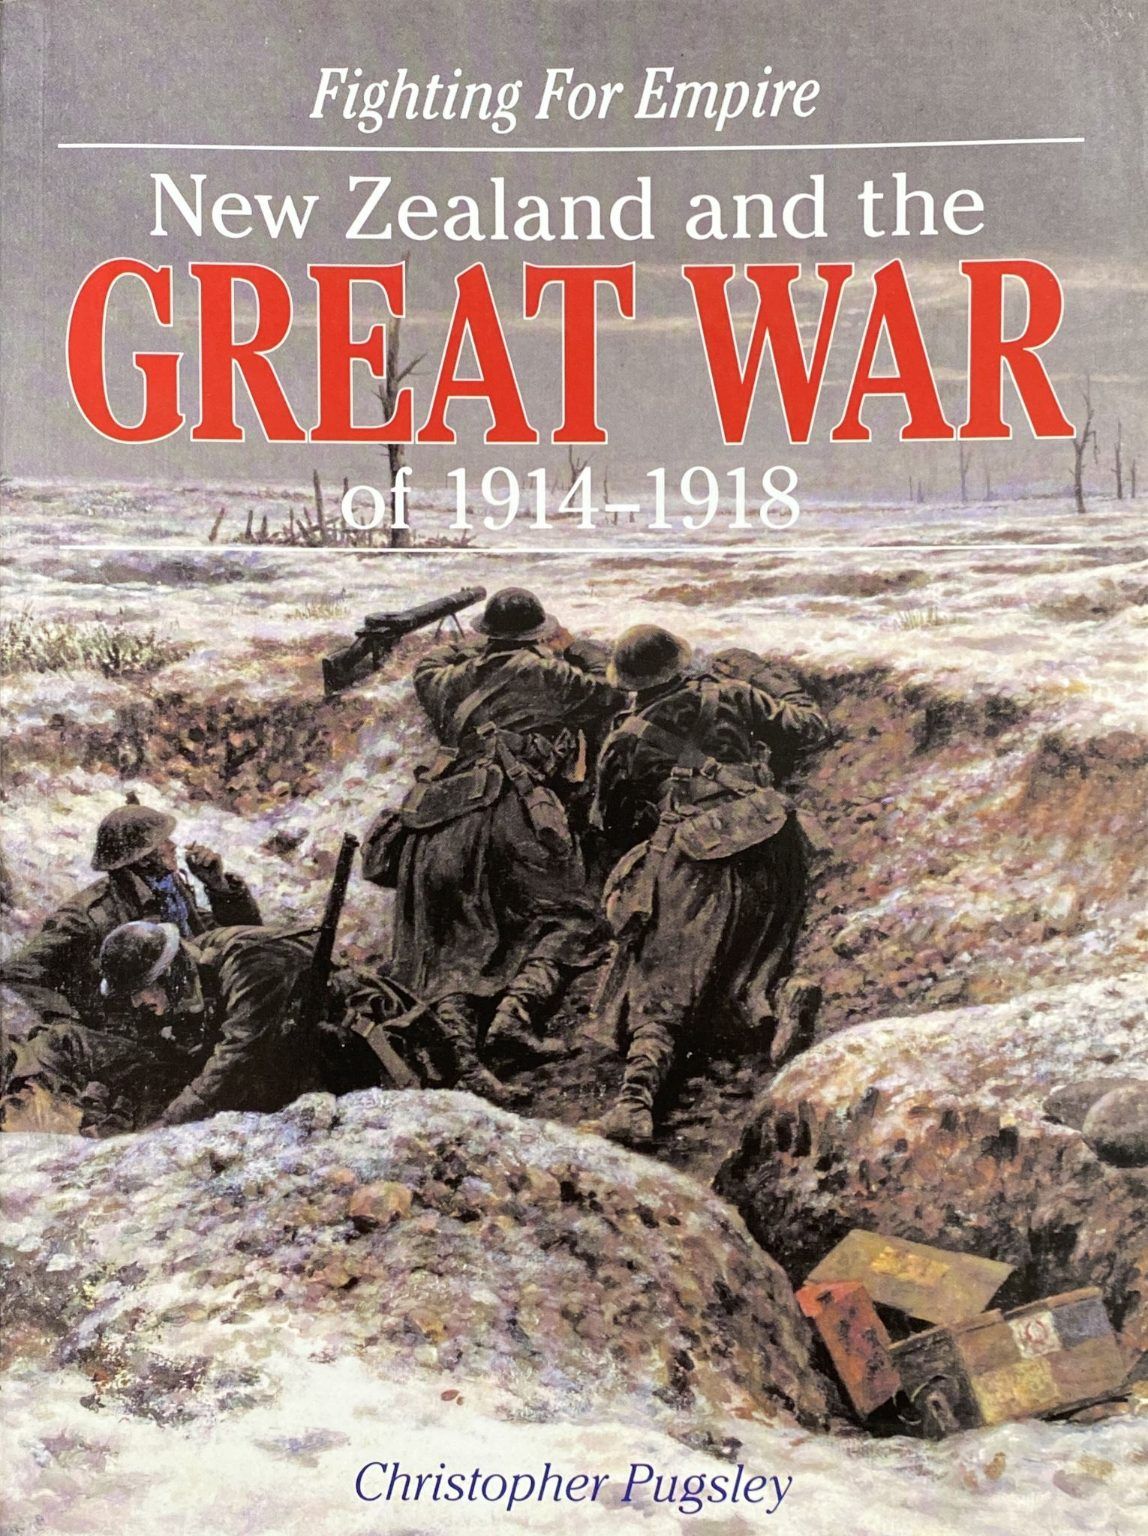 FIGHTING FOR EMPIRE: New Zealand and the Great War of 1914-1918